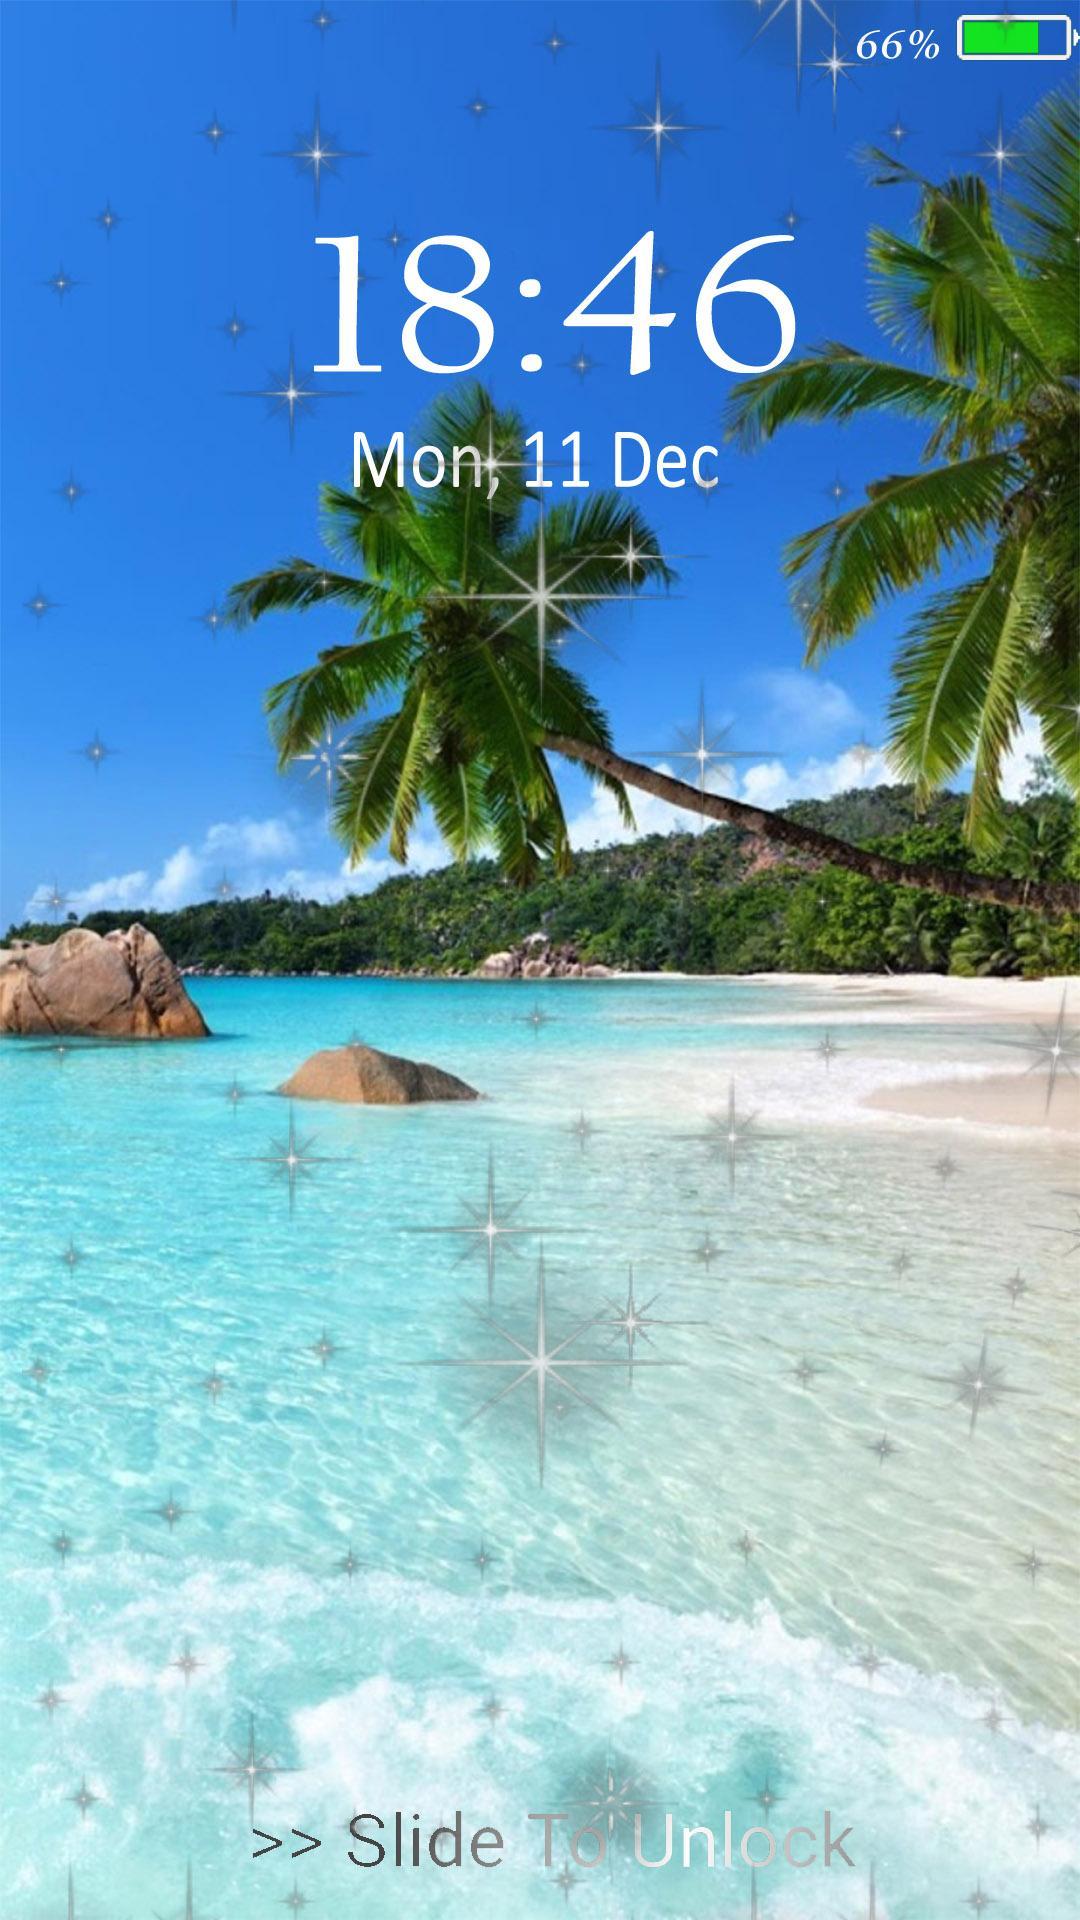 Beach live wallpaper & Lock screen for Android - APK Download